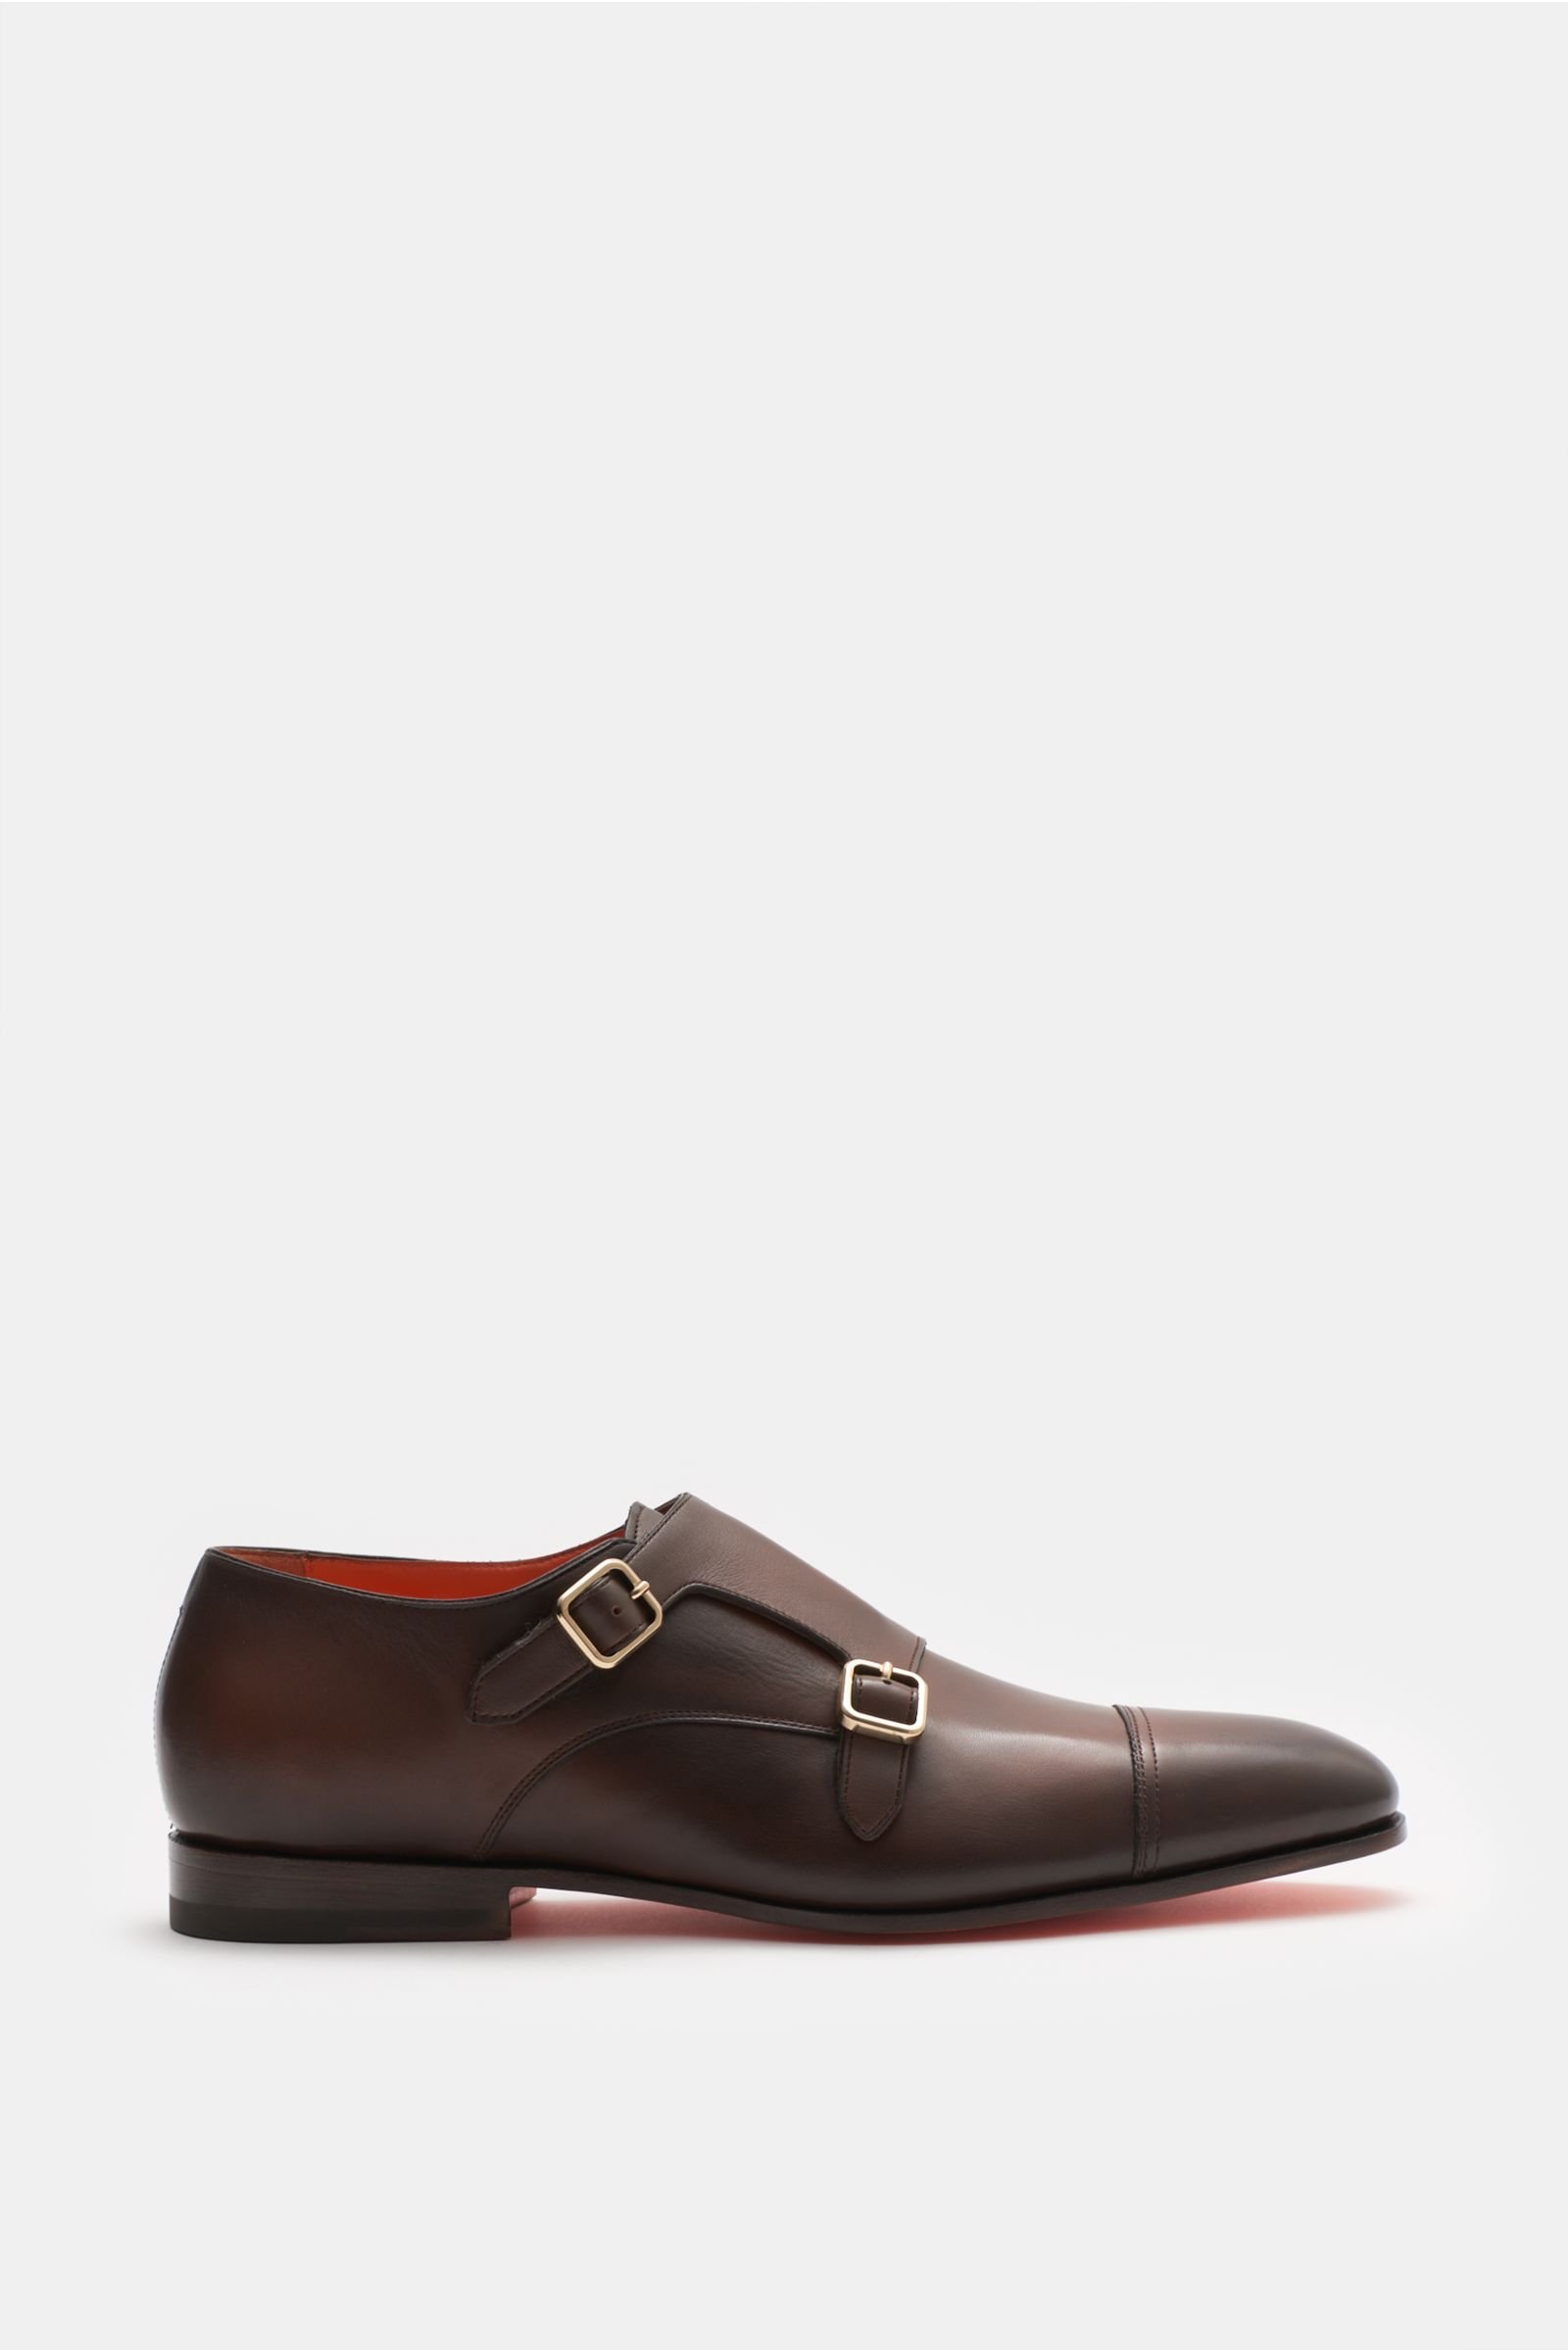 Double monk shoes brown